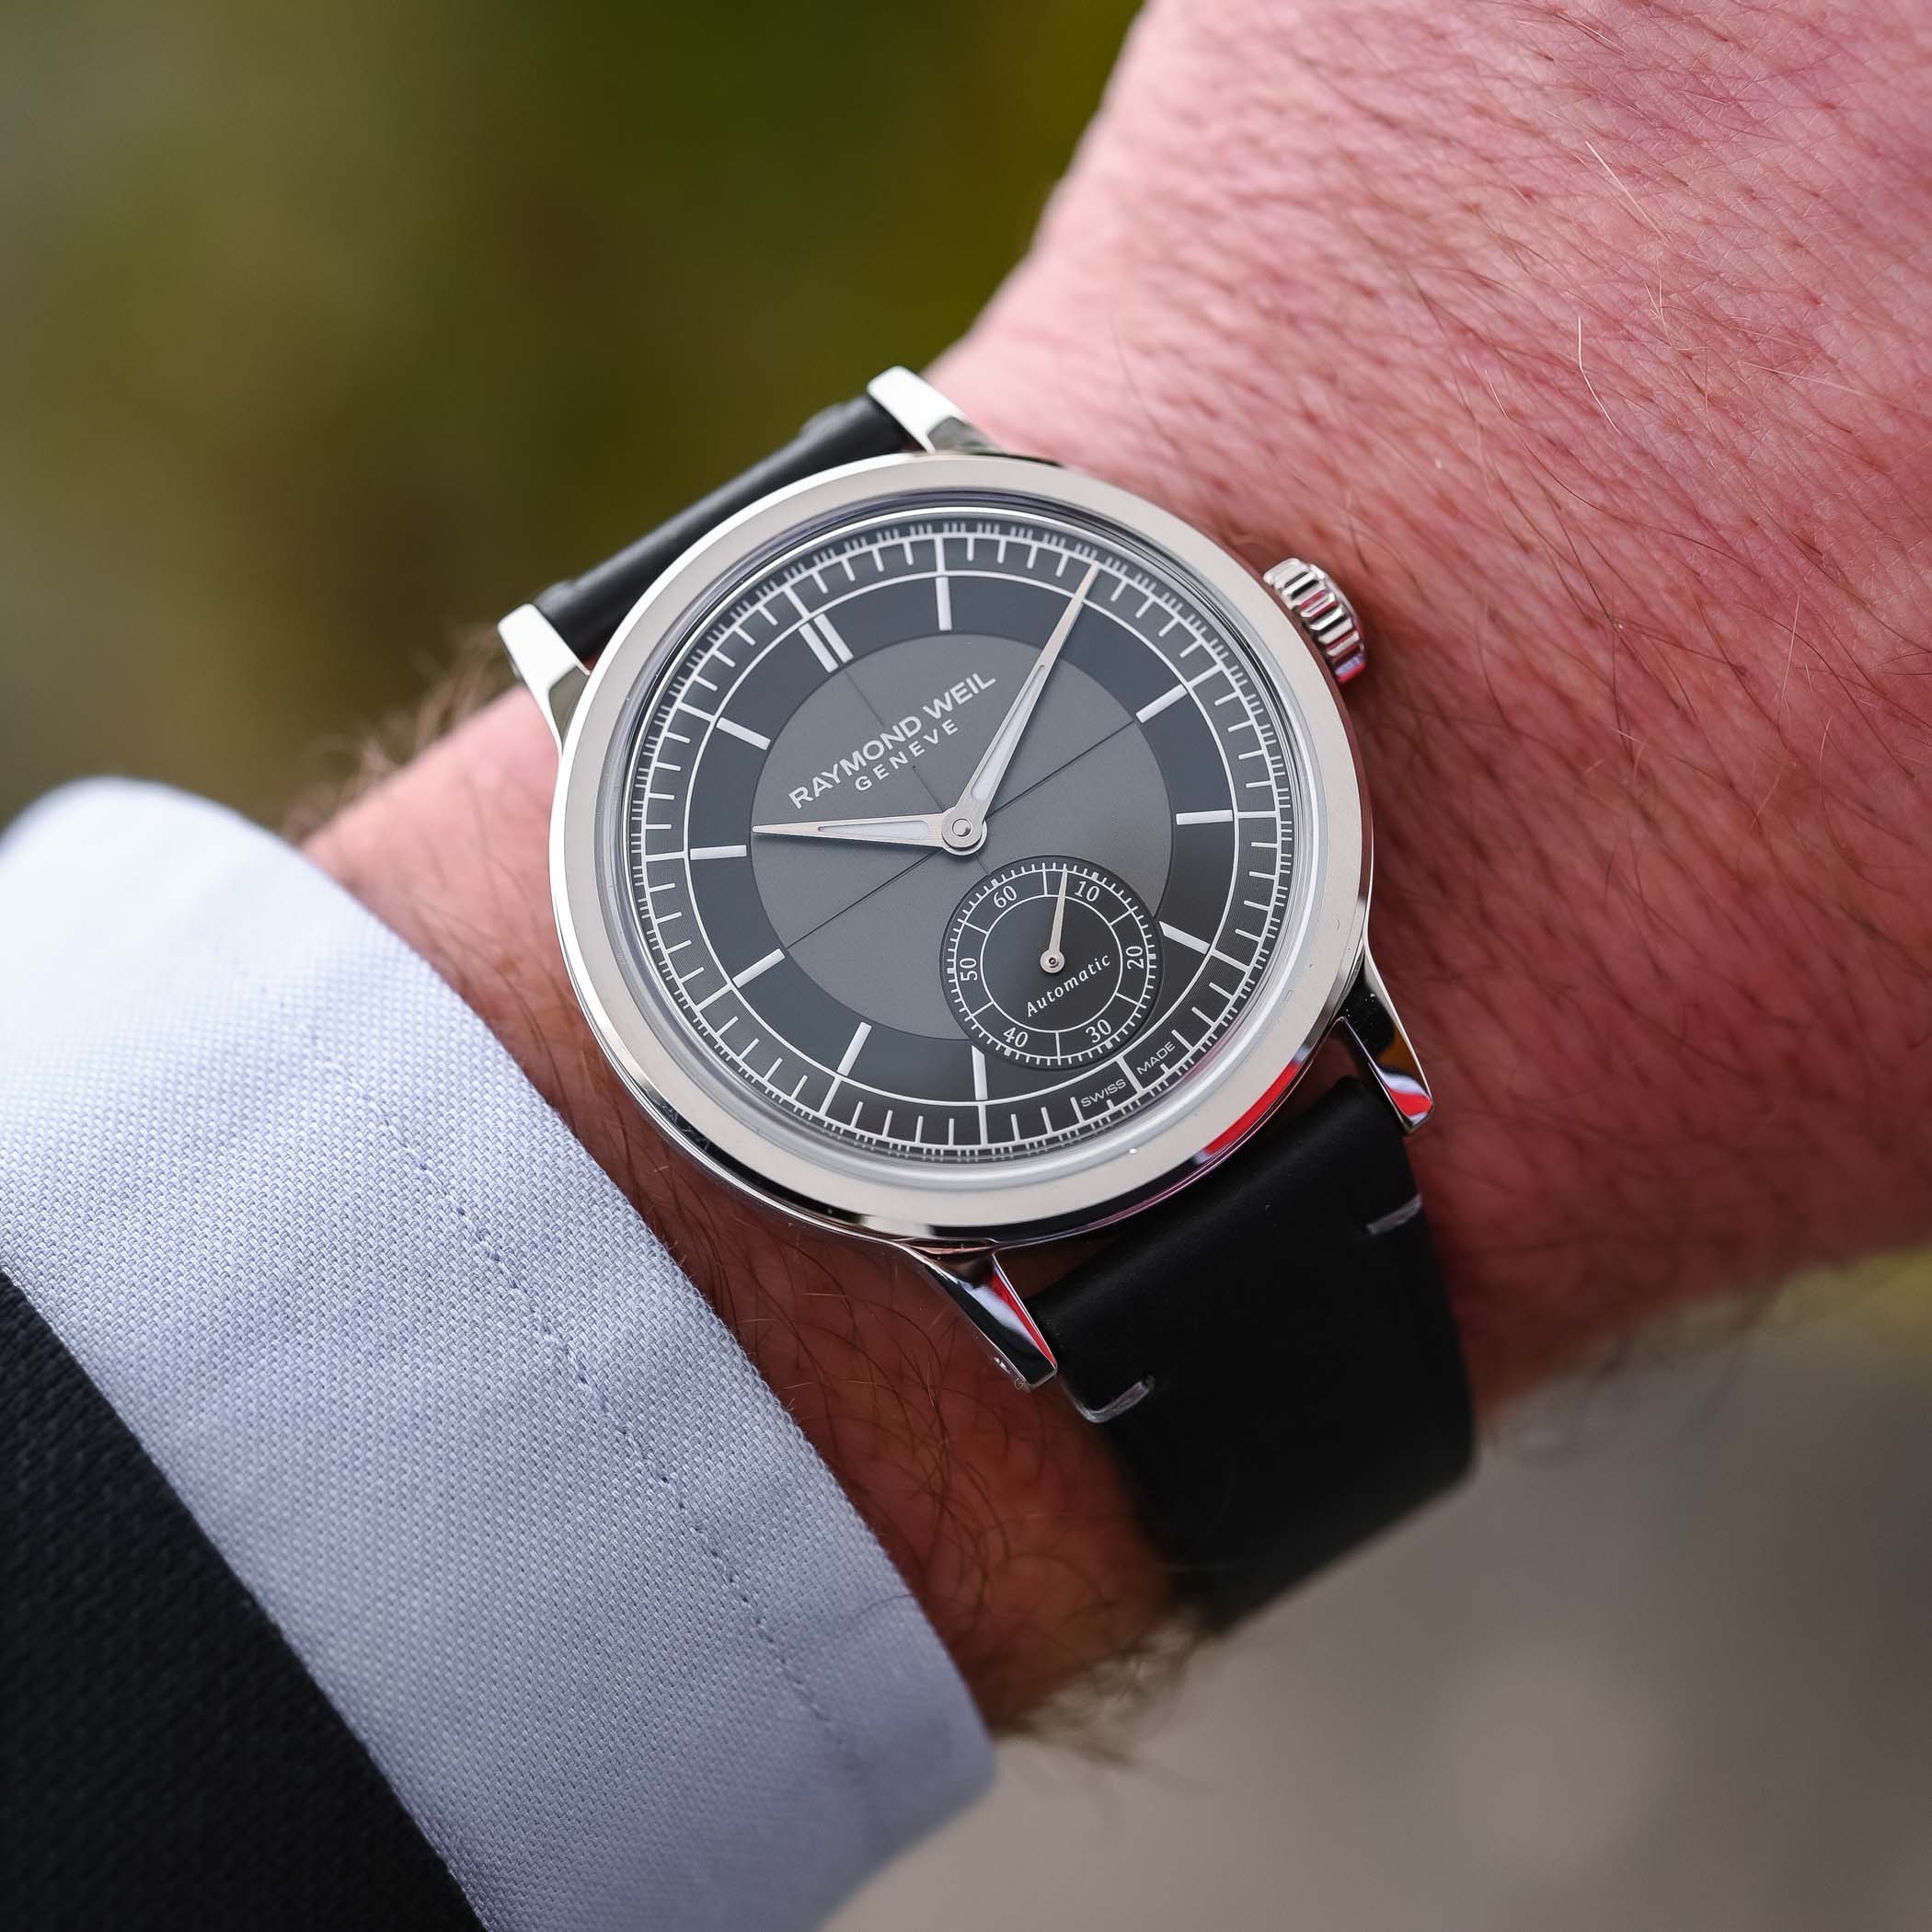 Raymond Weil Millesime Small Seconds 2930 Sector Dial - hands-on review - 3